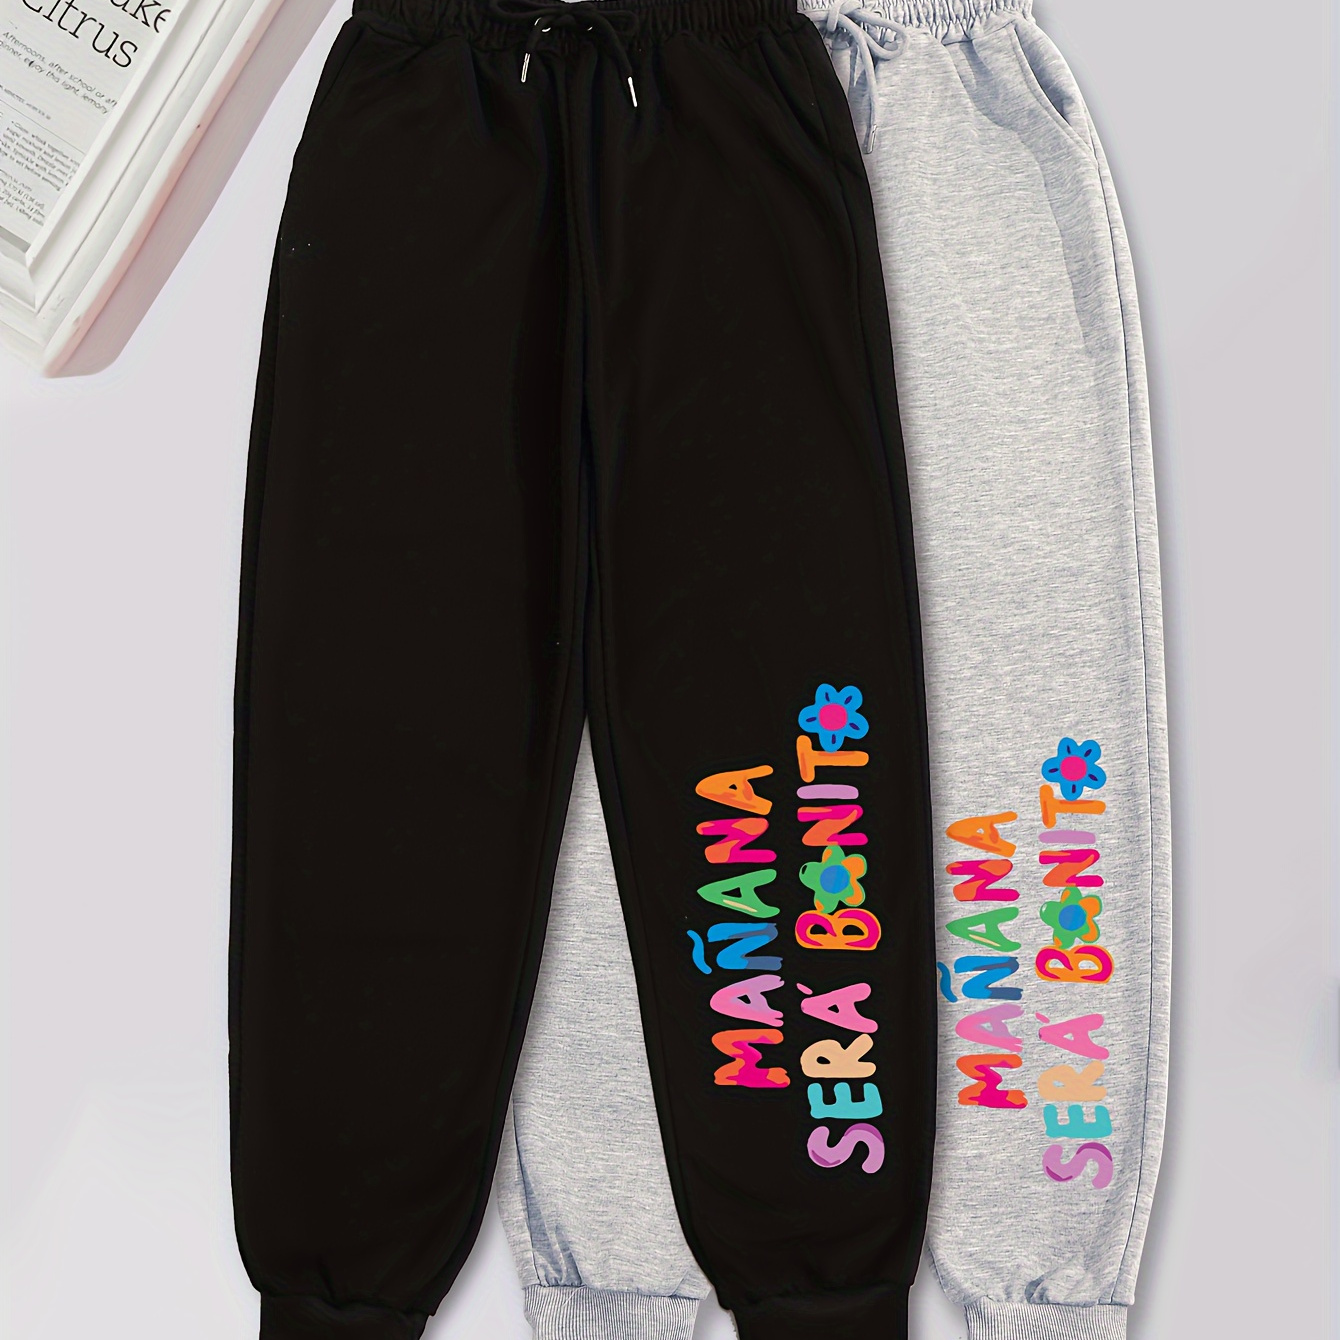 

Cartoon Letter Print Jogger Sweatpants 2 Pack, Casual Drawstring Sporty Pants With Pocket, Women's Clothing